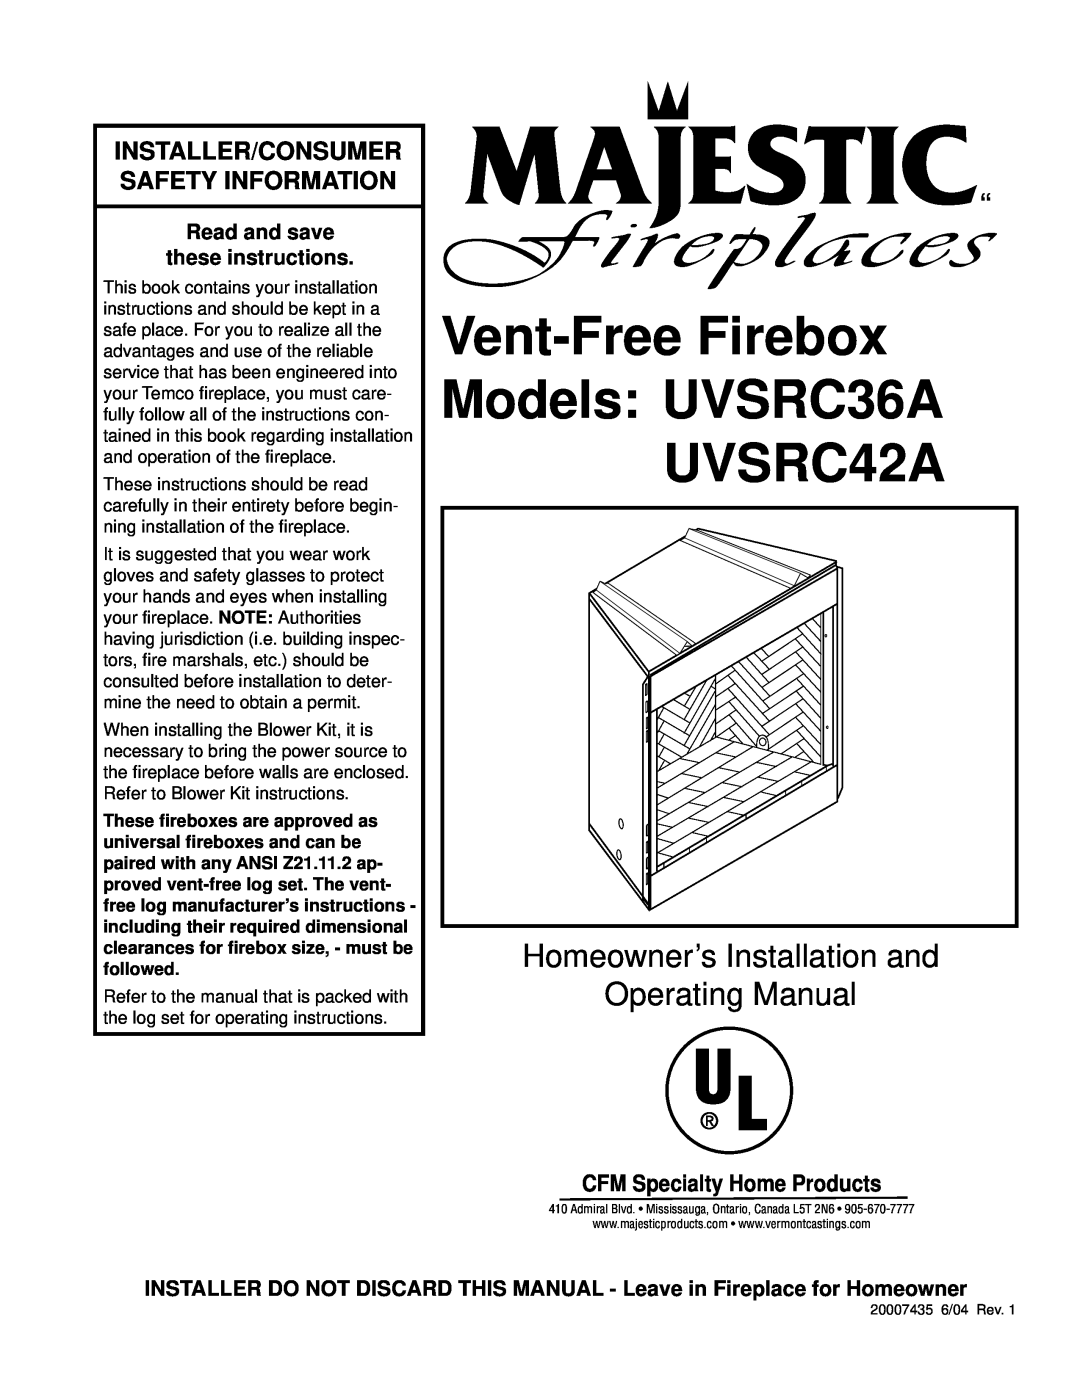 Majestic Appliances UVSRC42A installation instructions CFM Specialty Home Products, Read and save these instructions 